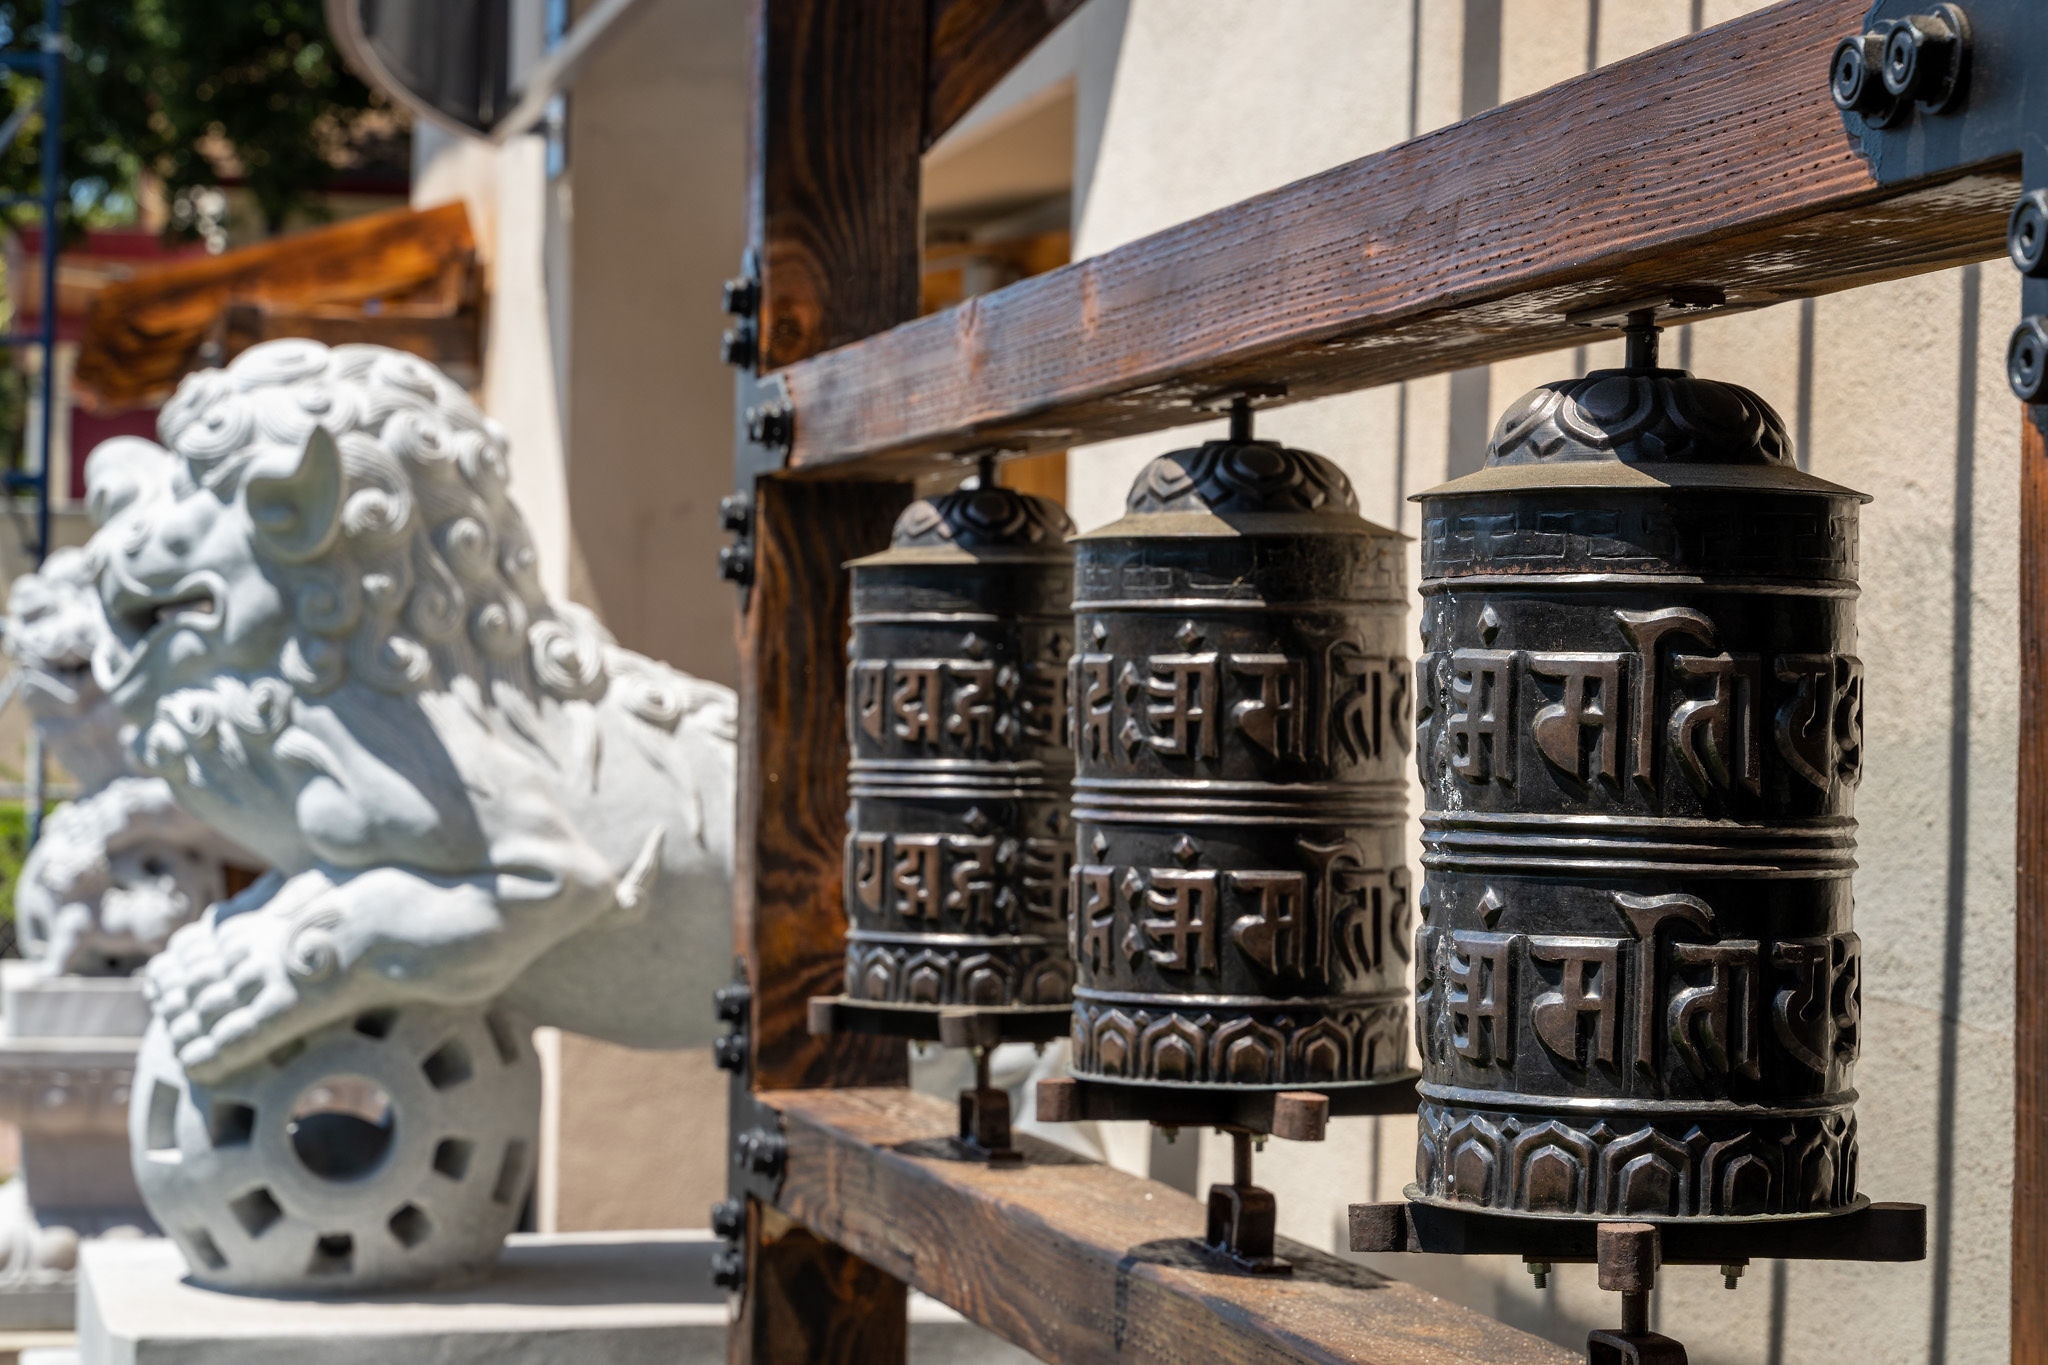 Bowie Estate prayer wheels and two guardian lion dog statue in San Mateo.